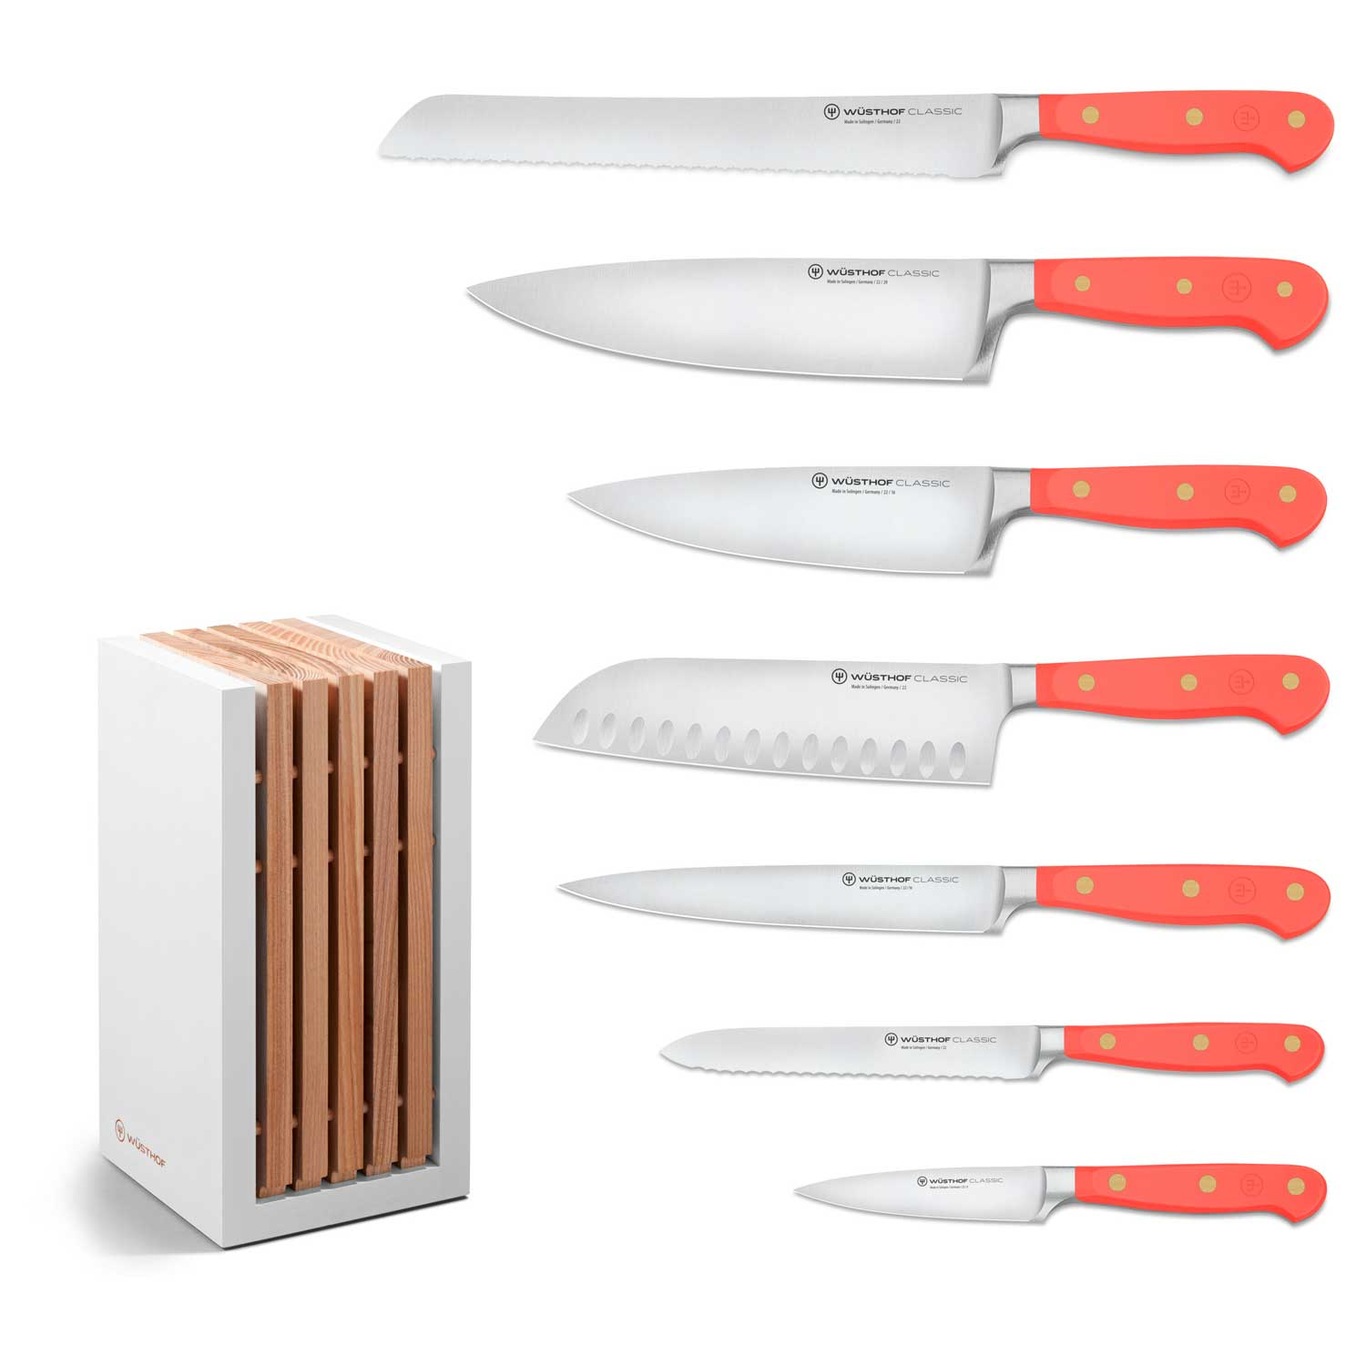 Classic Colour Knife Set With Knife Block 8 Pieces, Coral Peach